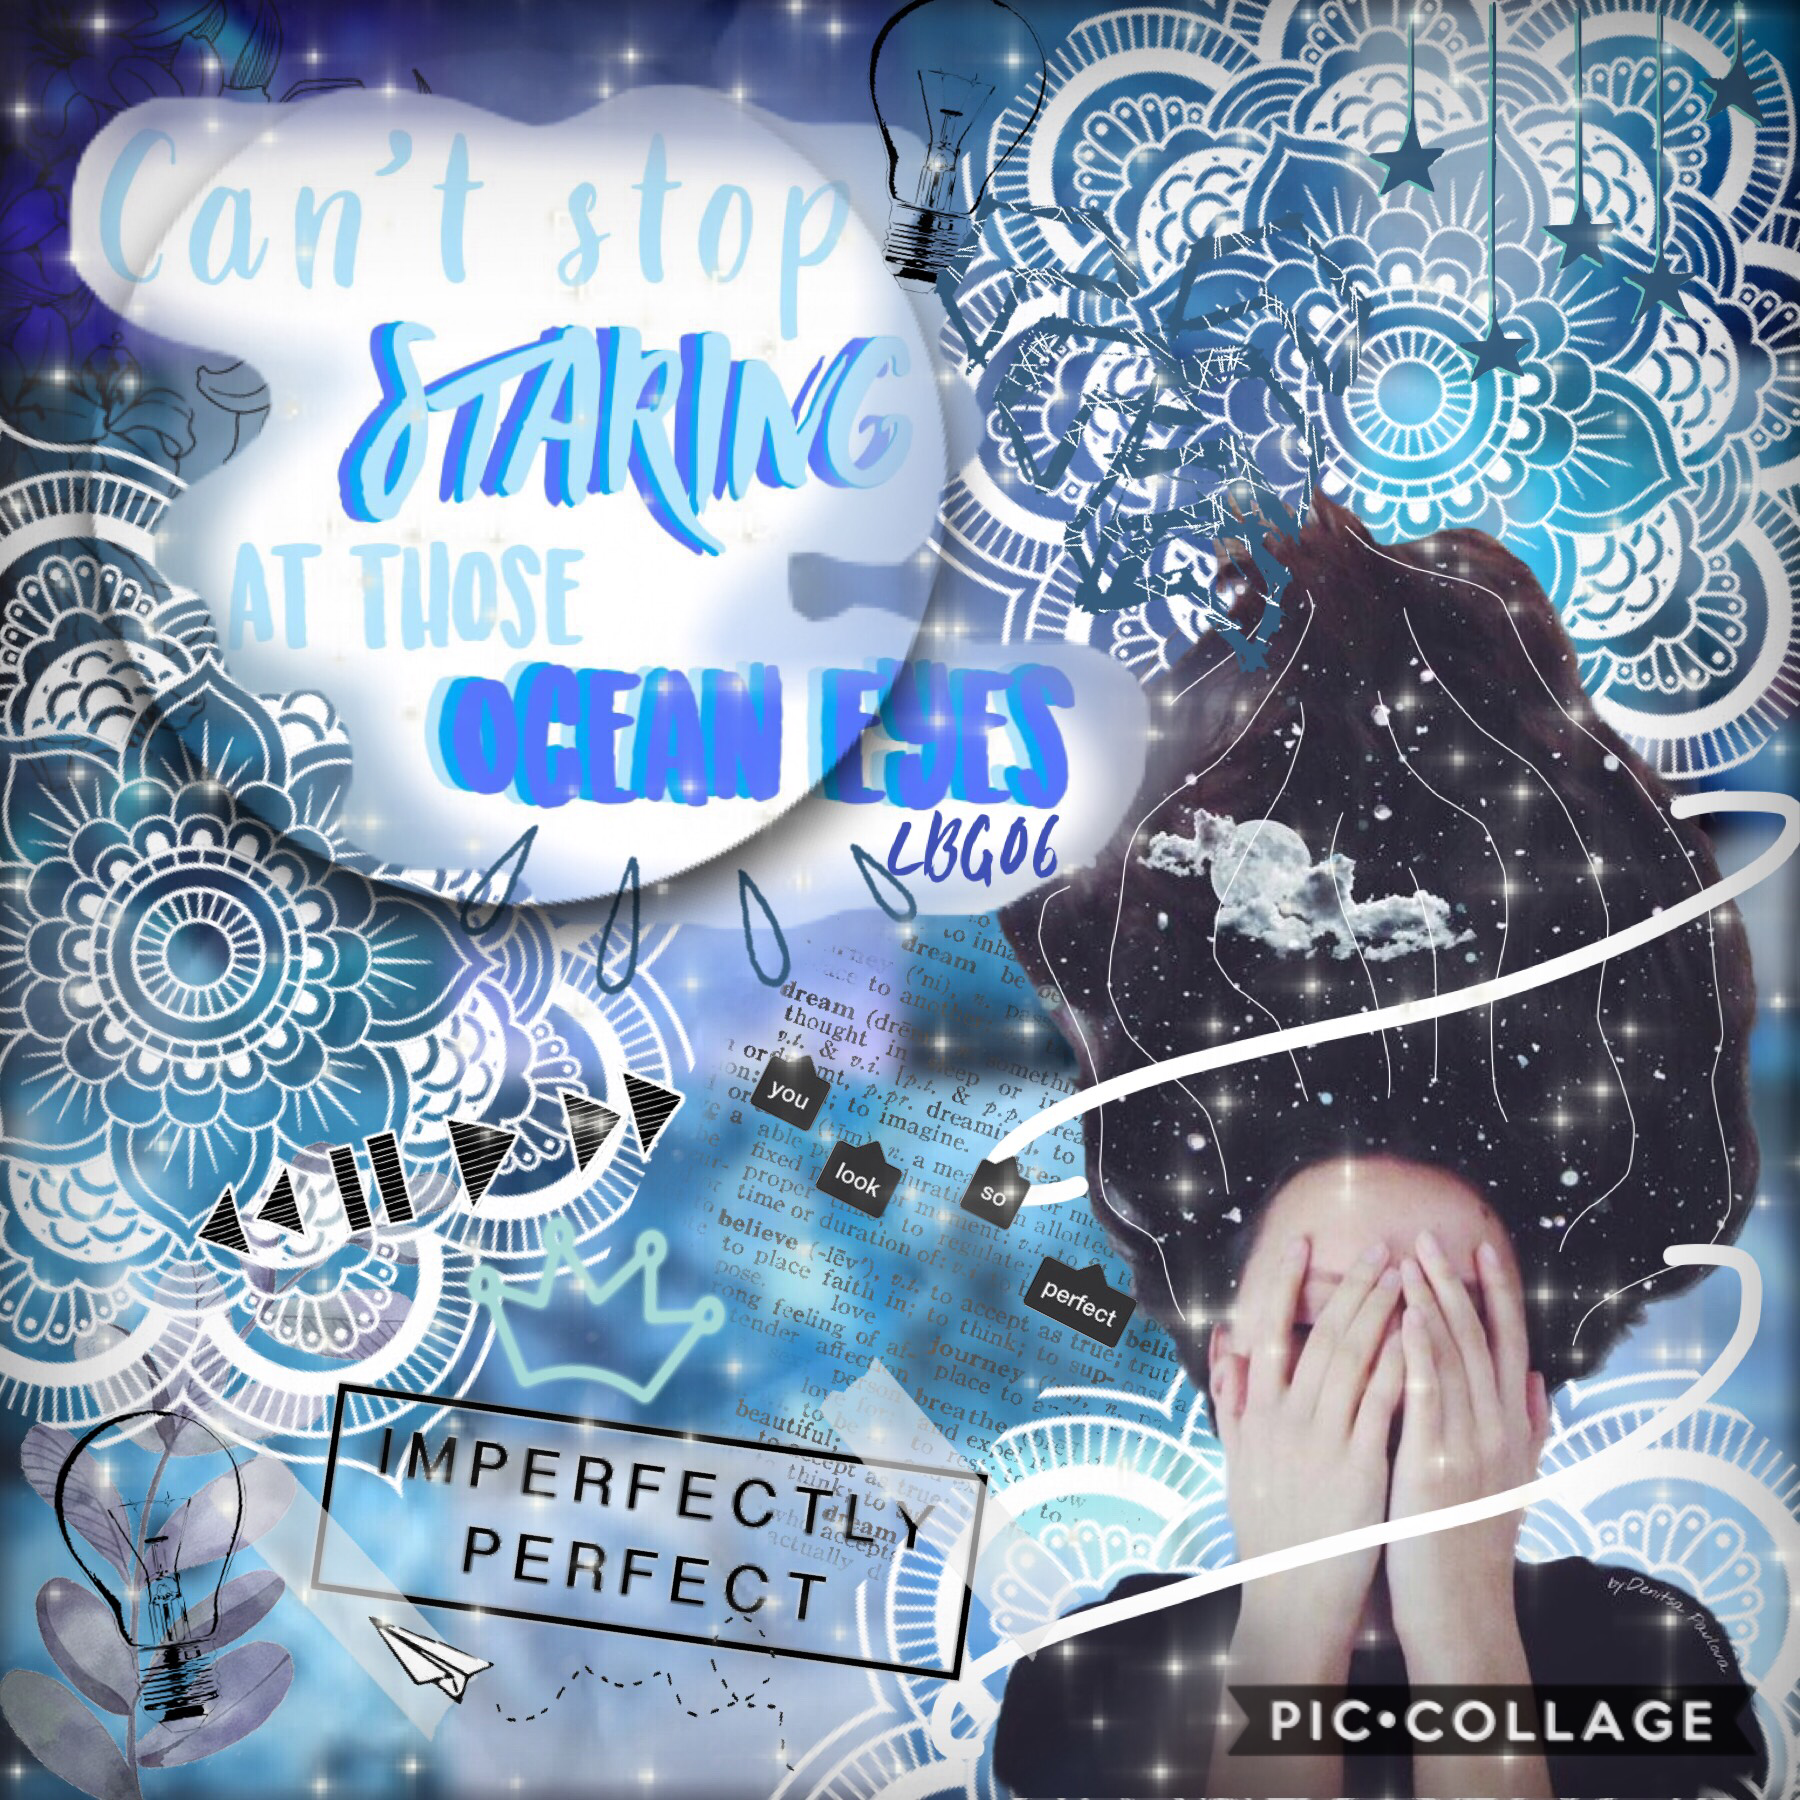 💙Tap🌊

I thinks there’s too many pngs 😂🤦🏼‍♀️🤷🏼‍♀️
Anyway..

QOTD: DO YOU KNOW THIS SONG IF SO WHAT IS IT CALLED?
AOTD: ik this song it’s called.........🤐😂 JK HAHA

If you’re in my games do the collage asap so you’re not eliminated 💜

XOXOXOOXOX💕❤️💕